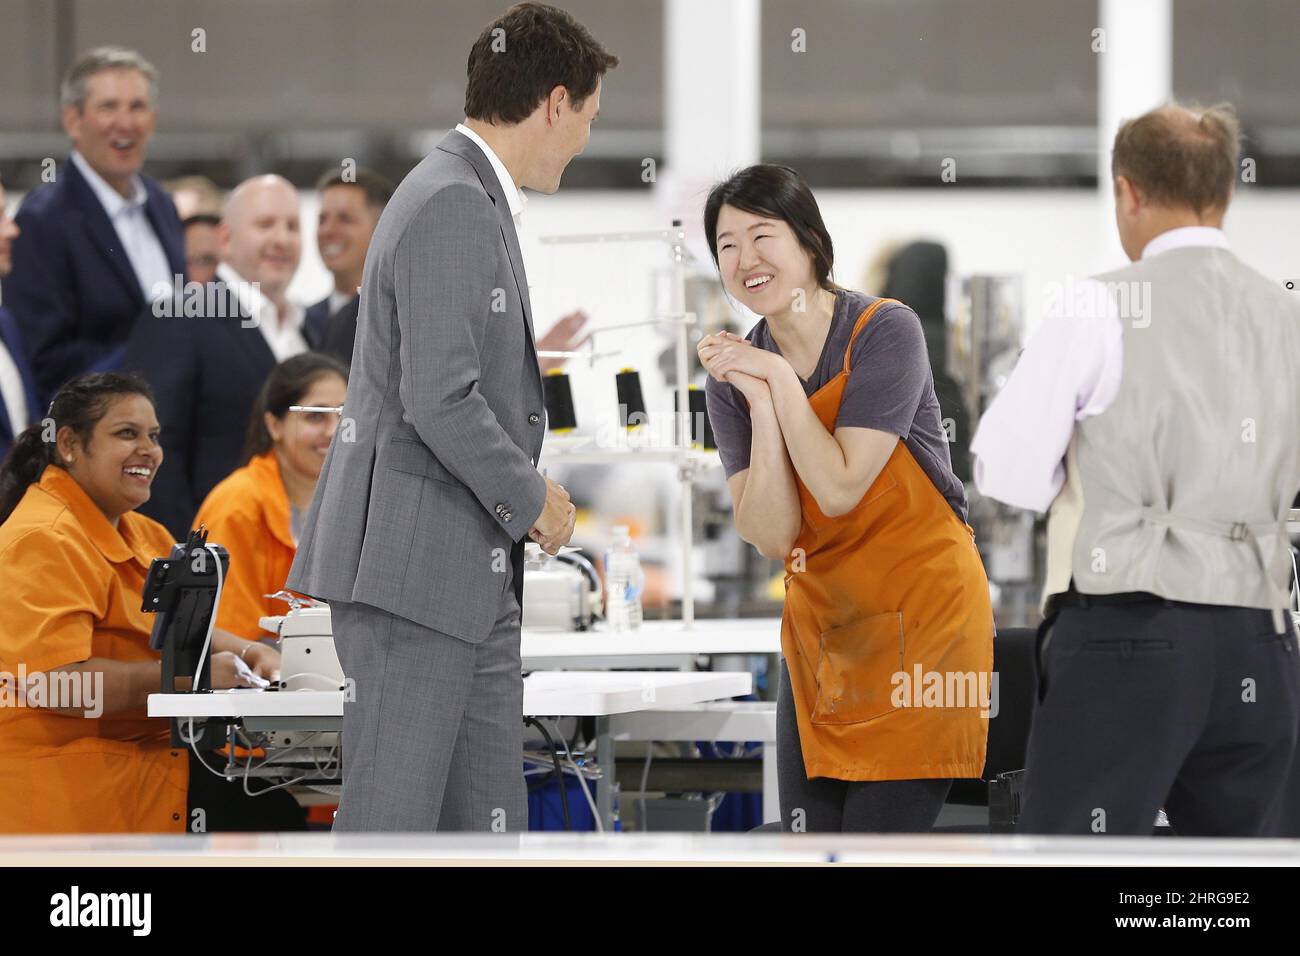 Canada Goose employee Seolhee Lee greets Prime Minister Justin Trudeau  during a brief tour of a new 700 employee Canada Goose manufacturing  facility in Winnipeg, Manitoba Tuesday, September 11, 2018. THE CANADIAN